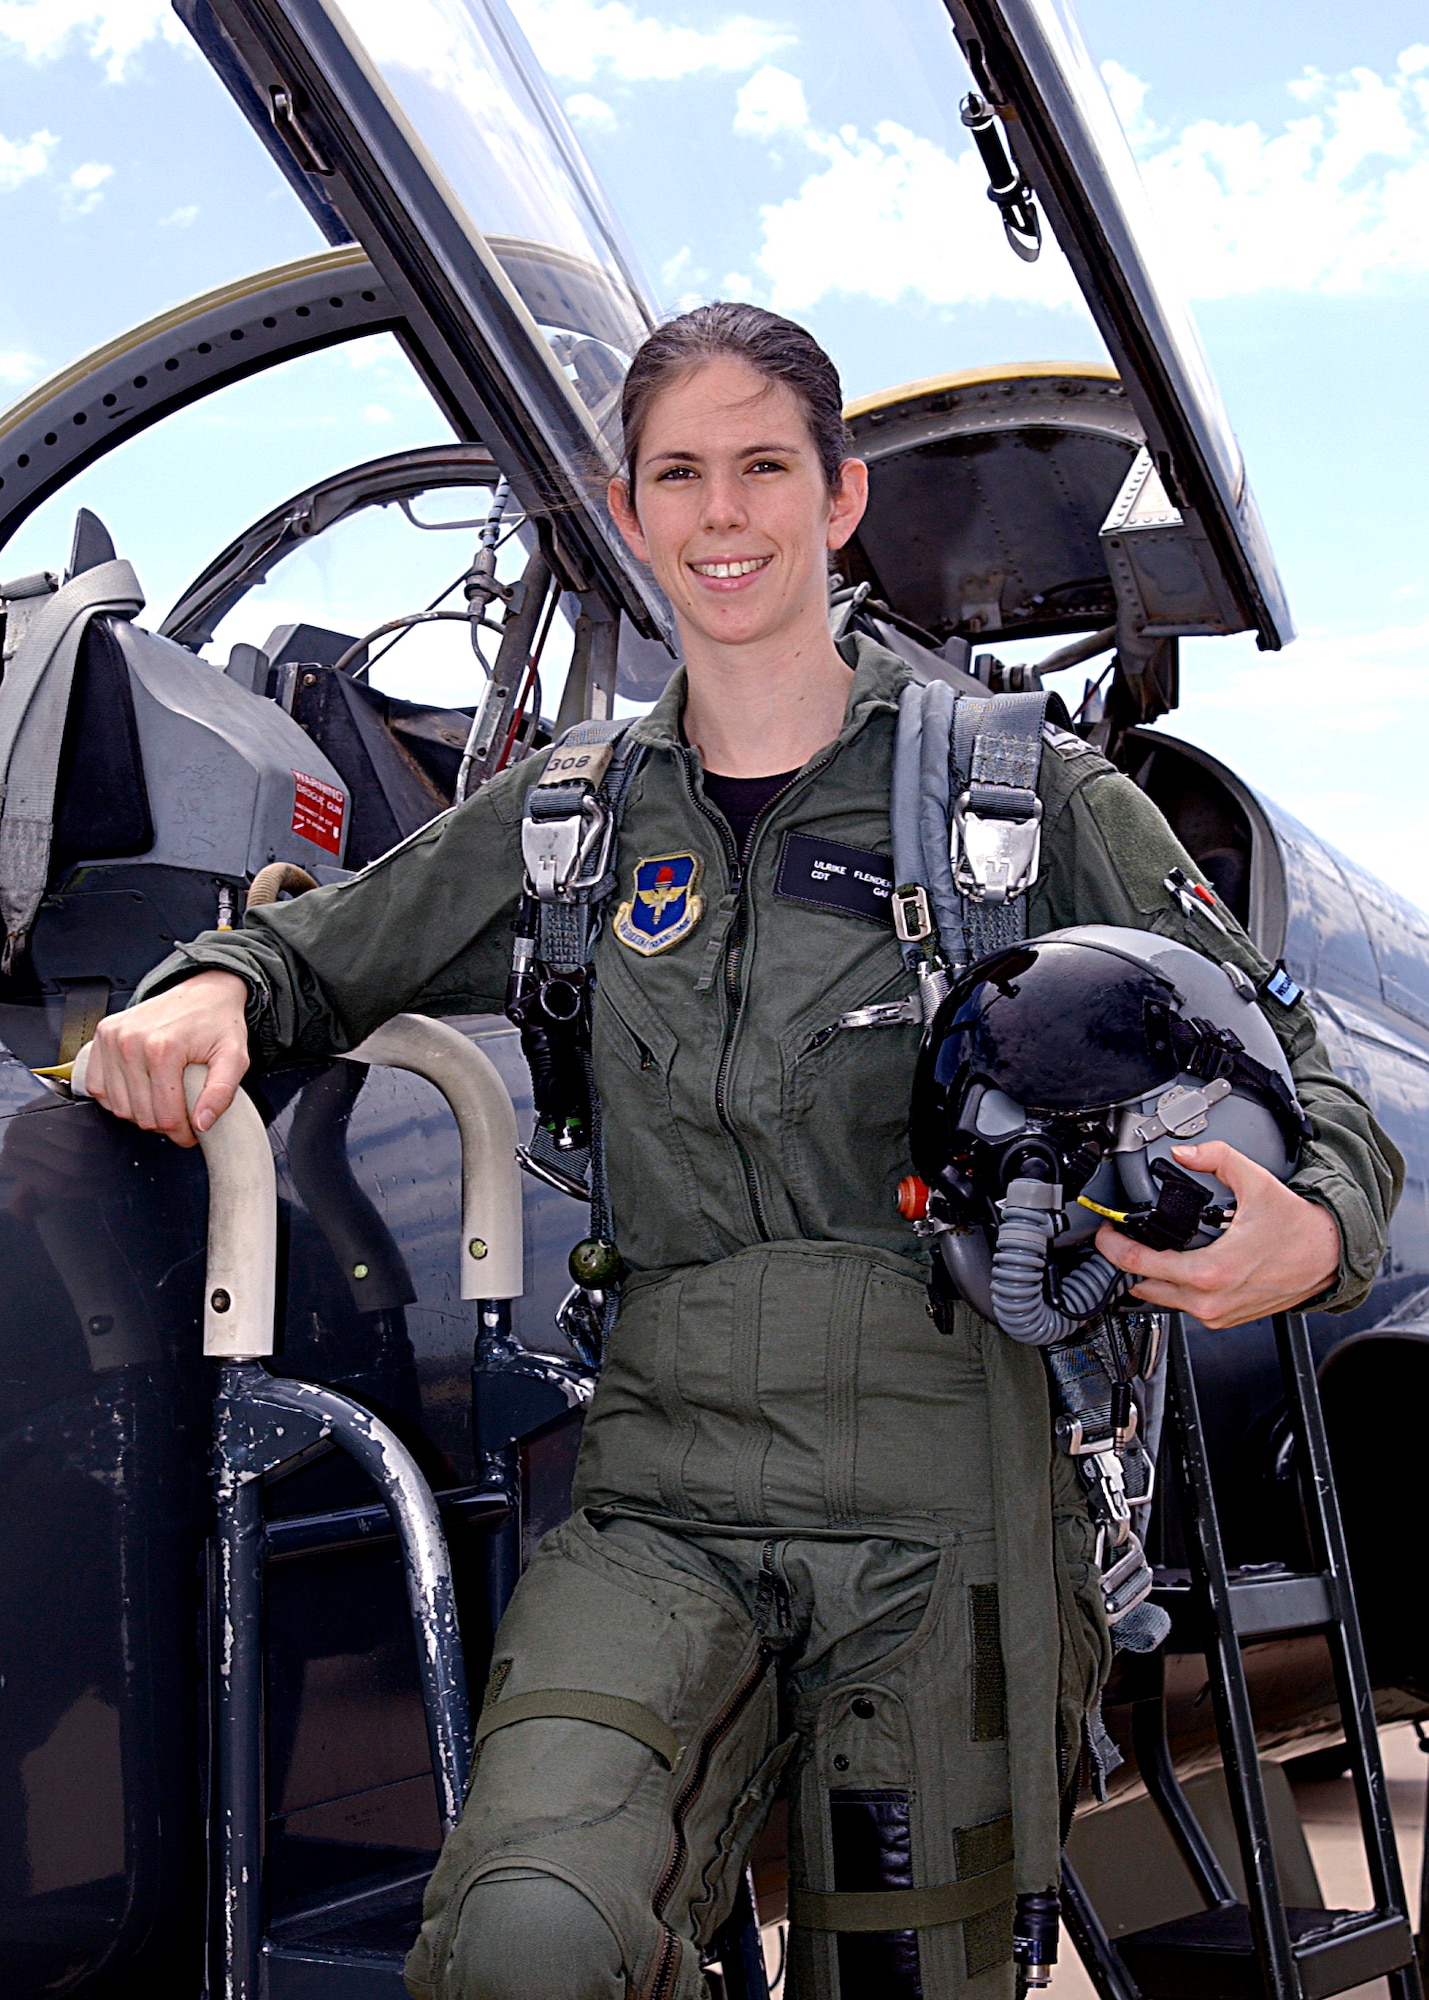 German Cadet Ulrike Flender is the first female from the European country to graduate from the Euro-NATO Joint Jet Pilot Training program at Sheppard Air Force Base, Texas. (U.S. Air Force photo)